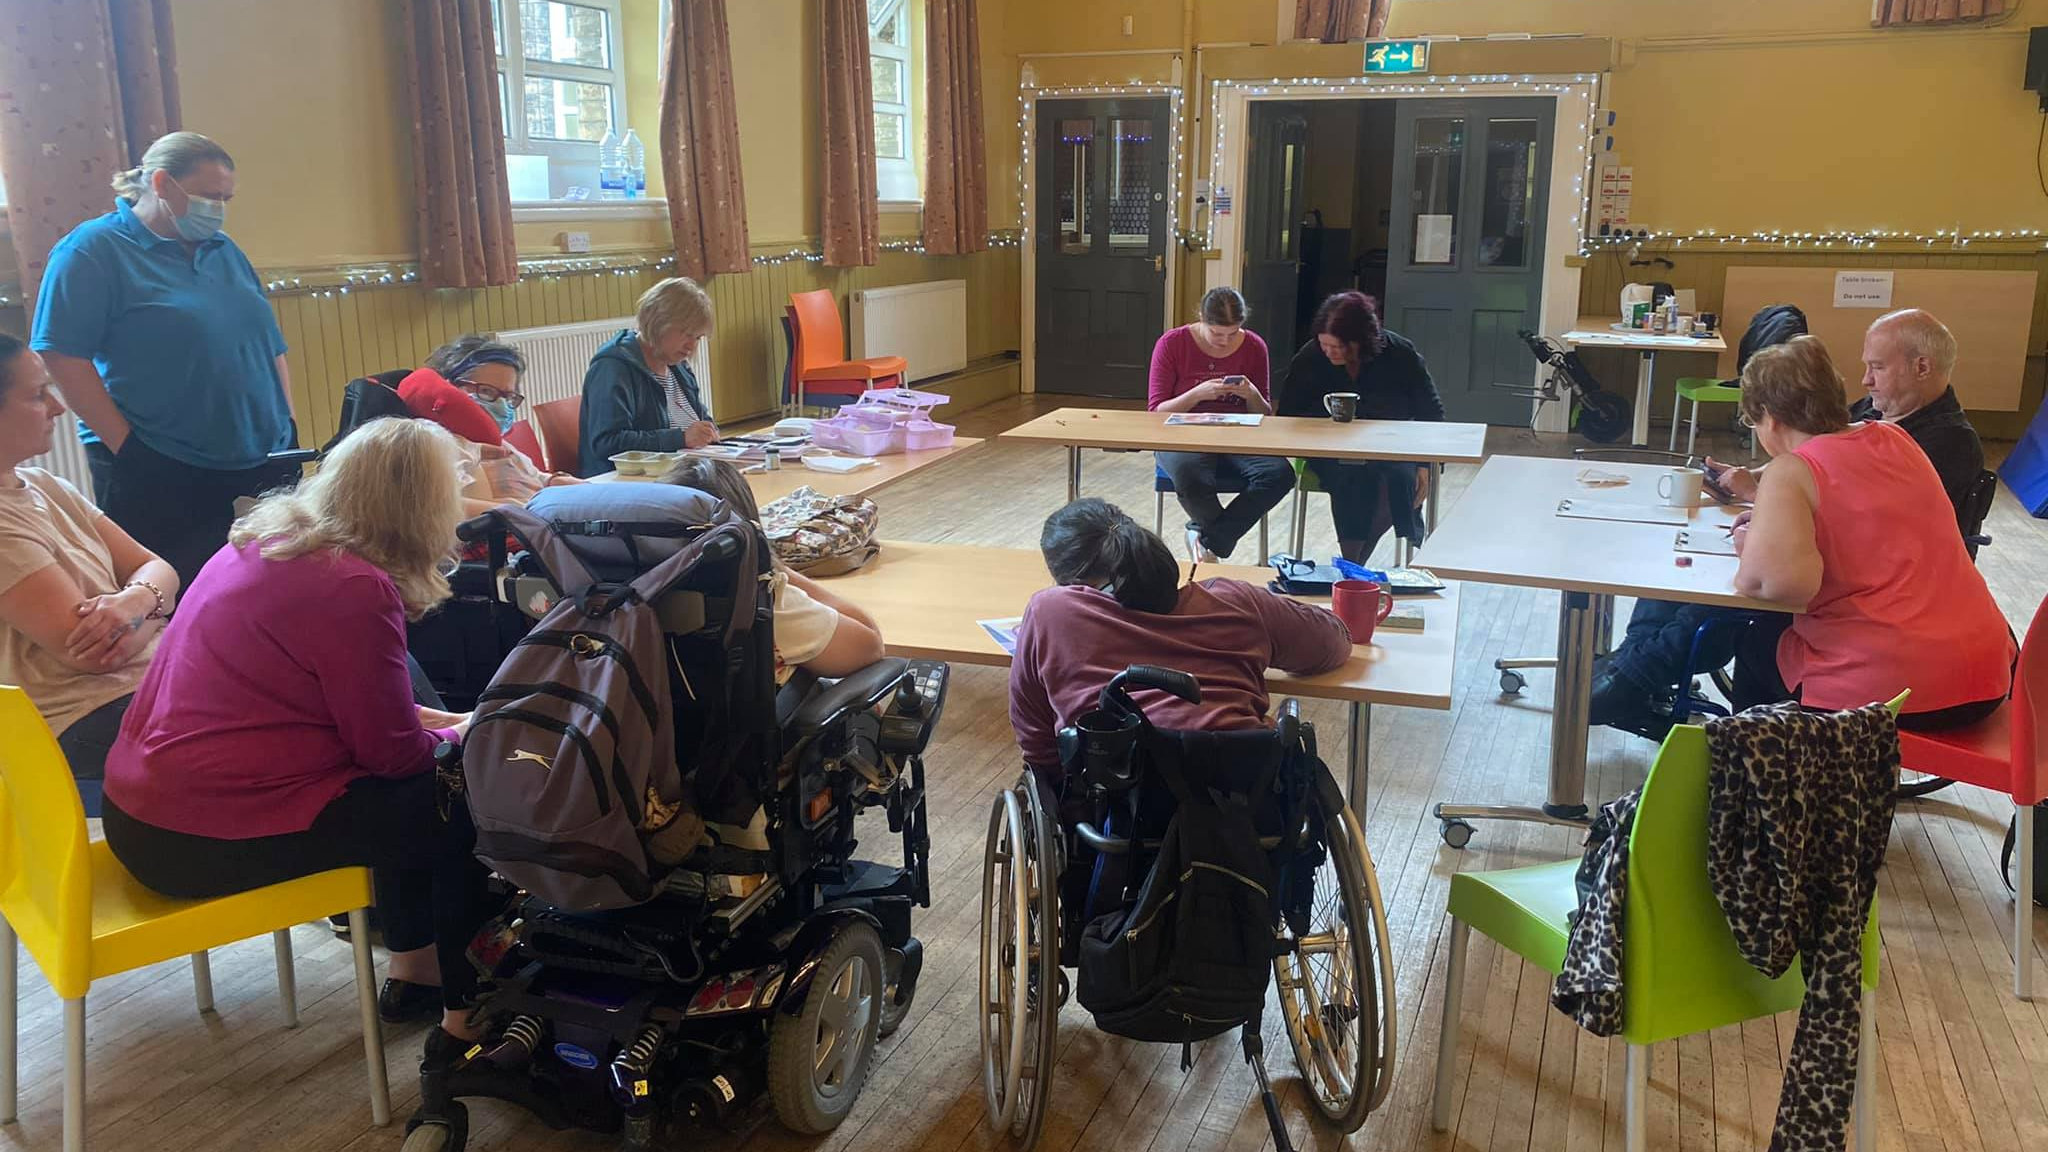 A group of people, some of whom are wheelchair users, sit around a circle of tables and work on their own projects.